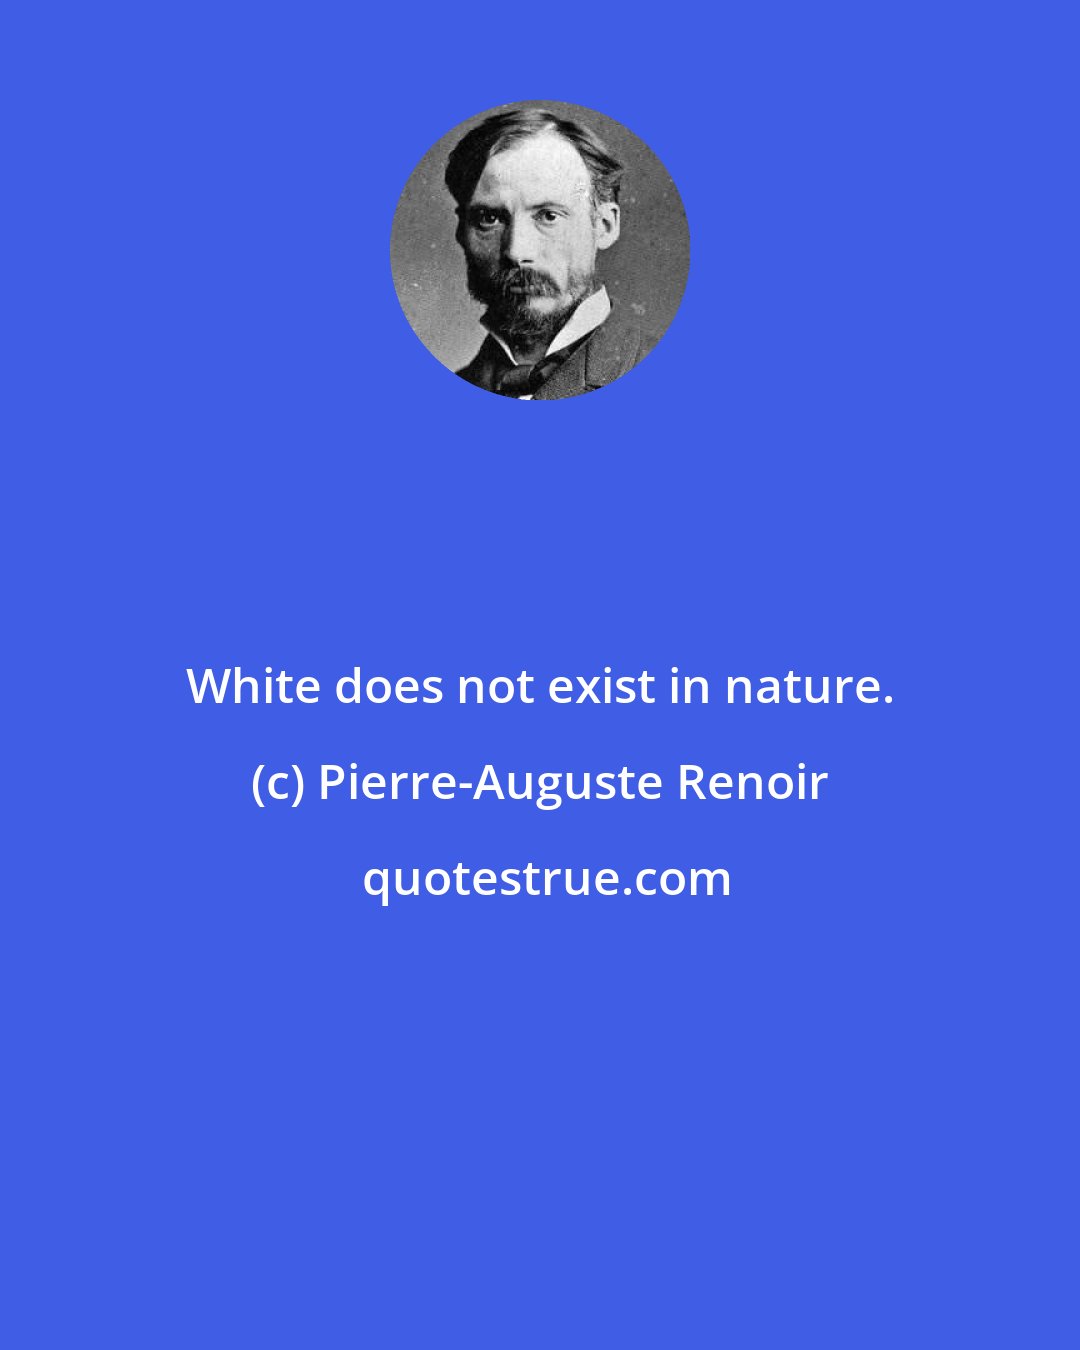 Pierre-Auguste Renoir: White does not exist in nature.